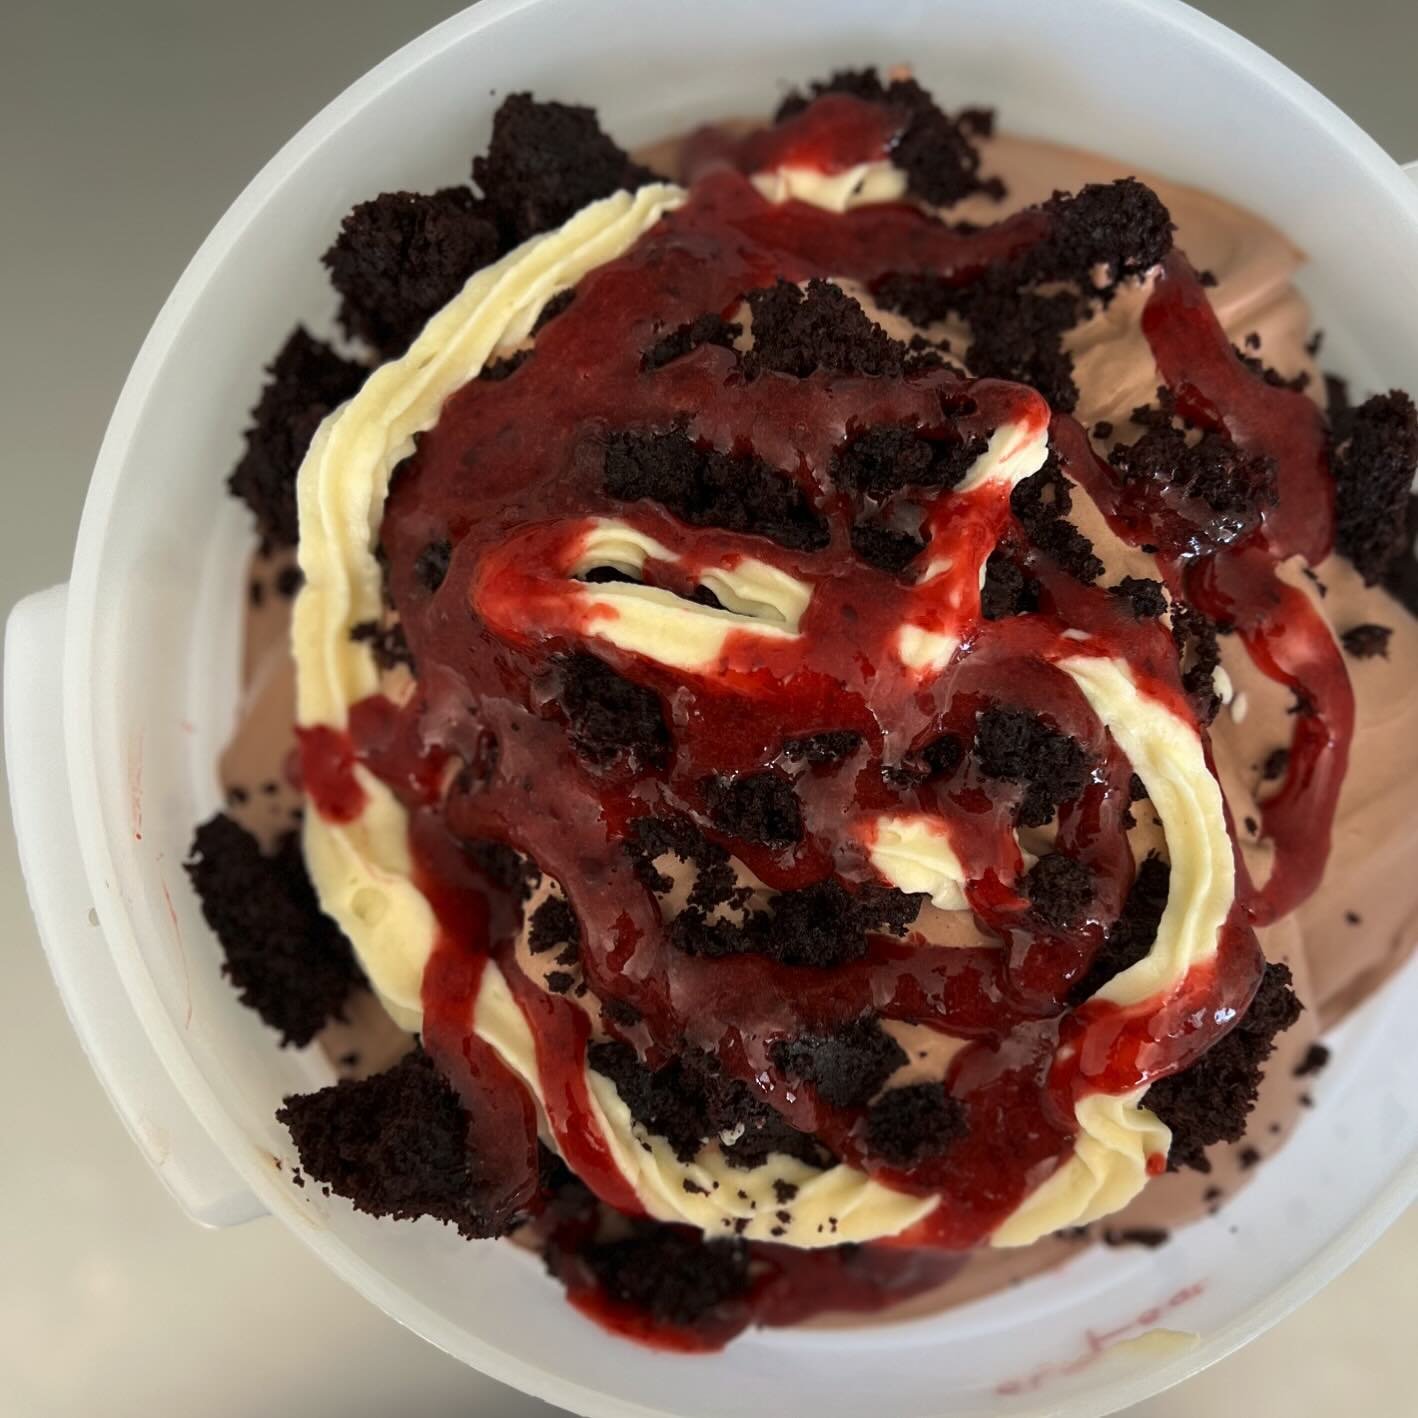 🎂BLACK FOREST CAKE🎂

Chocolate ice cream✔️
Chocolate cake✔️
Buttercream frosting✔️
Cherry jam swirl✔️
Every ingredient made right here✔️

🍫🍫🍫

This is sooo good. Grab a scoop and come watch the duck race in Chester from 1-4 today!🐤